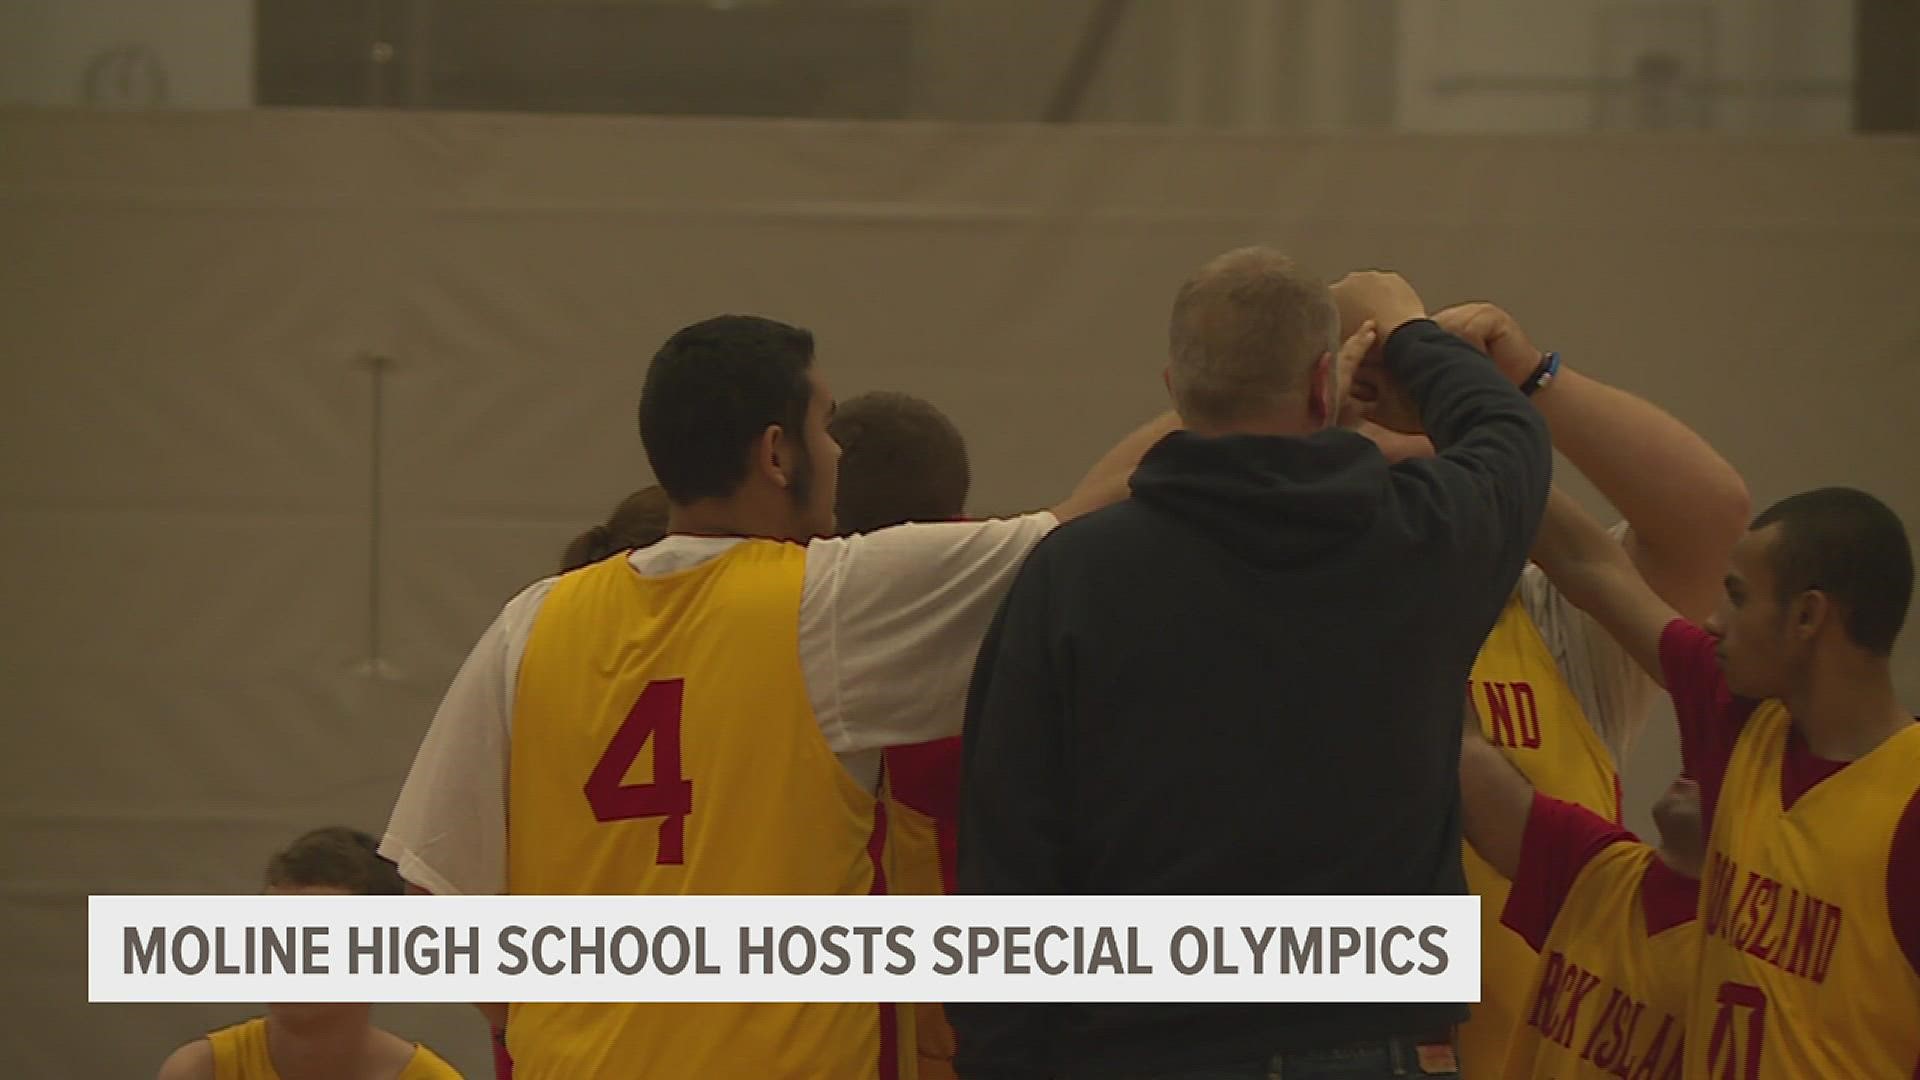 Rock Island and Galesburg high schools competed in a three-way round-robin-styled tournament for the chance to qualify for the Special Olympics Regional Tournament.